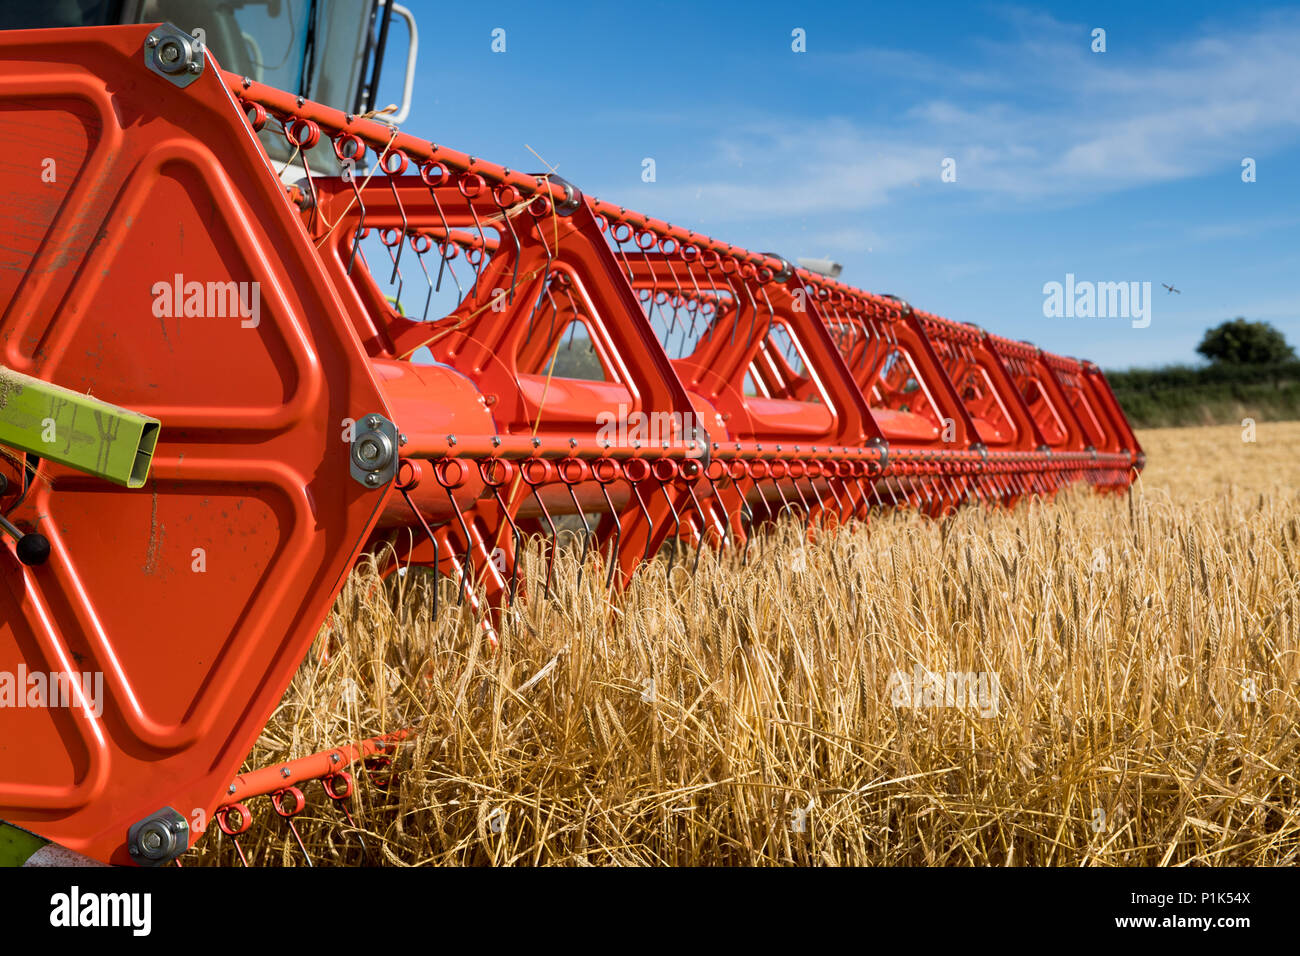 Close up of a Claas V900 35ft combine head with attached cameras, at work, harvesting barley. North Yorkshire, UK. Stock Photo